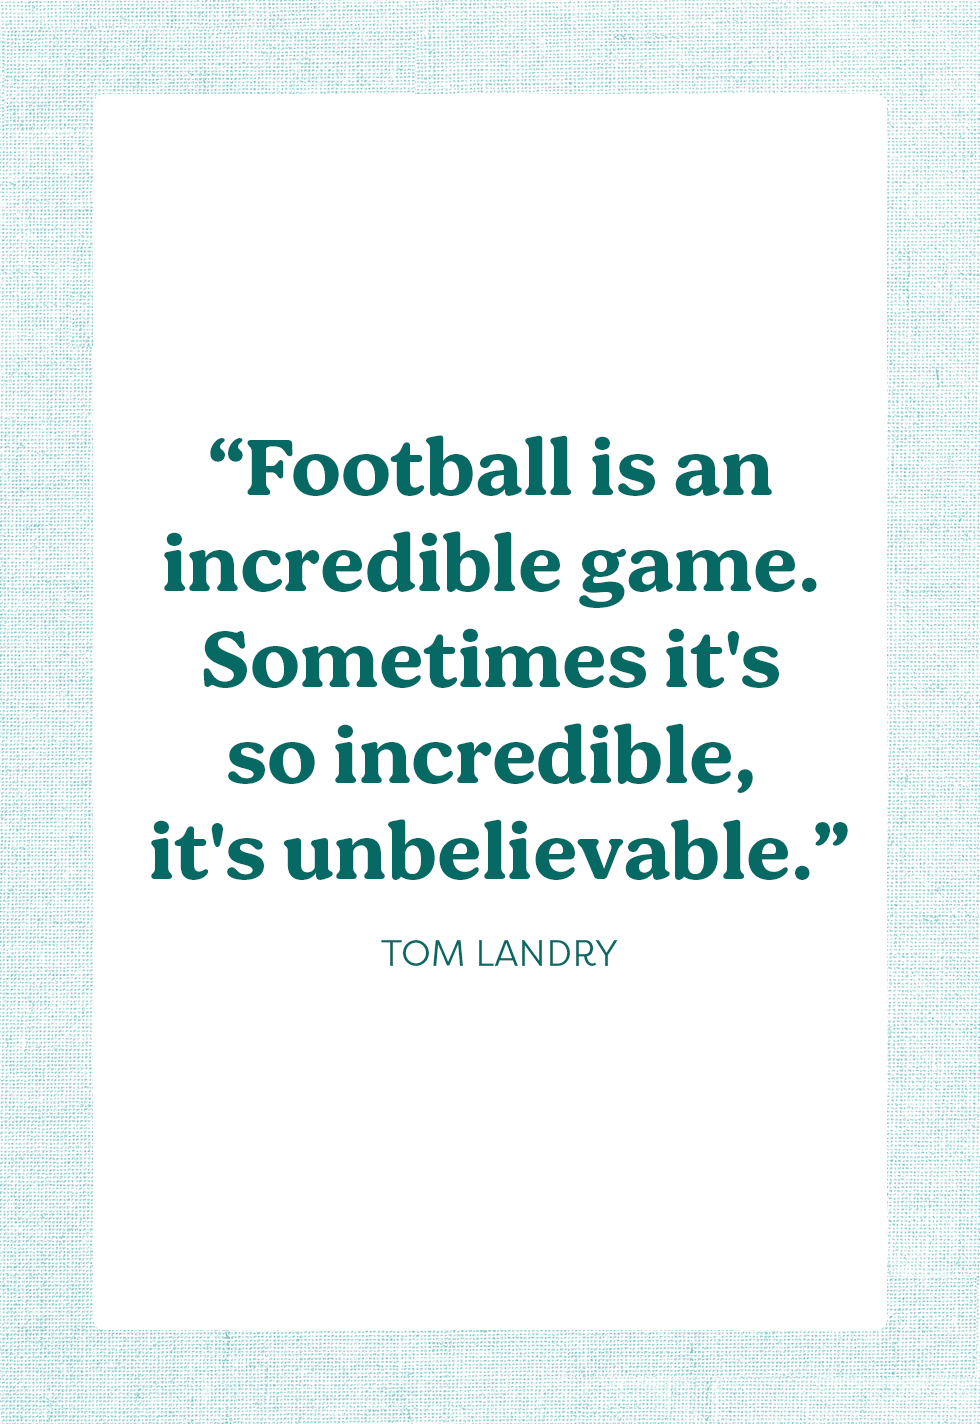 25 Motivational Football Quotes for Game Day